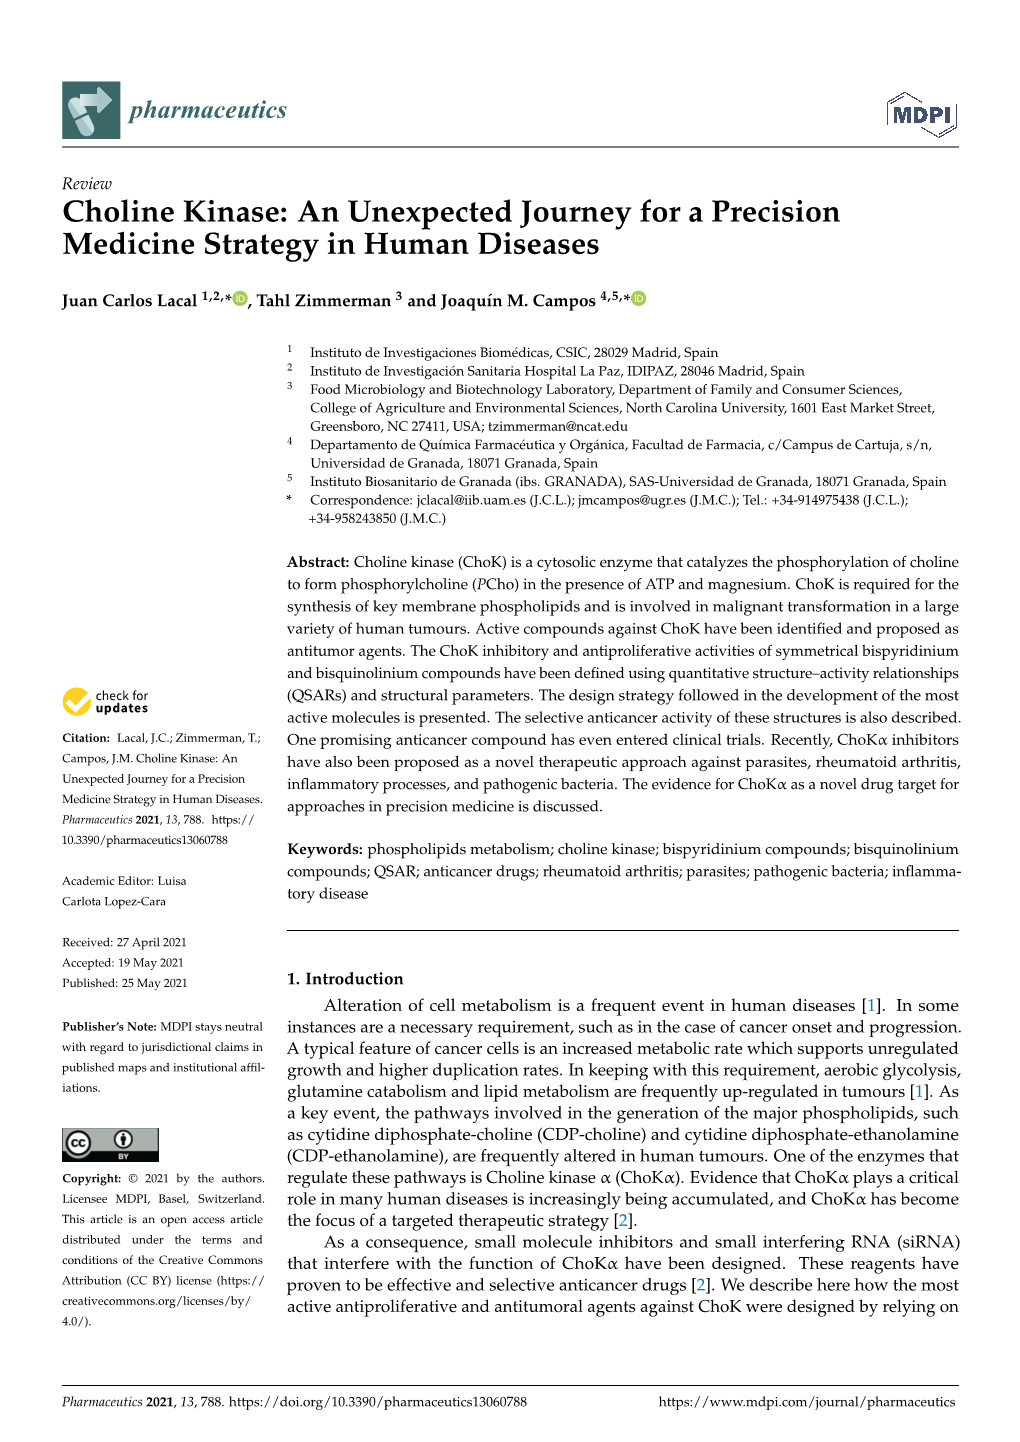 Choline Kinase: an Unexpected Journey for a Precision Medicine Strategy in Human Diseases